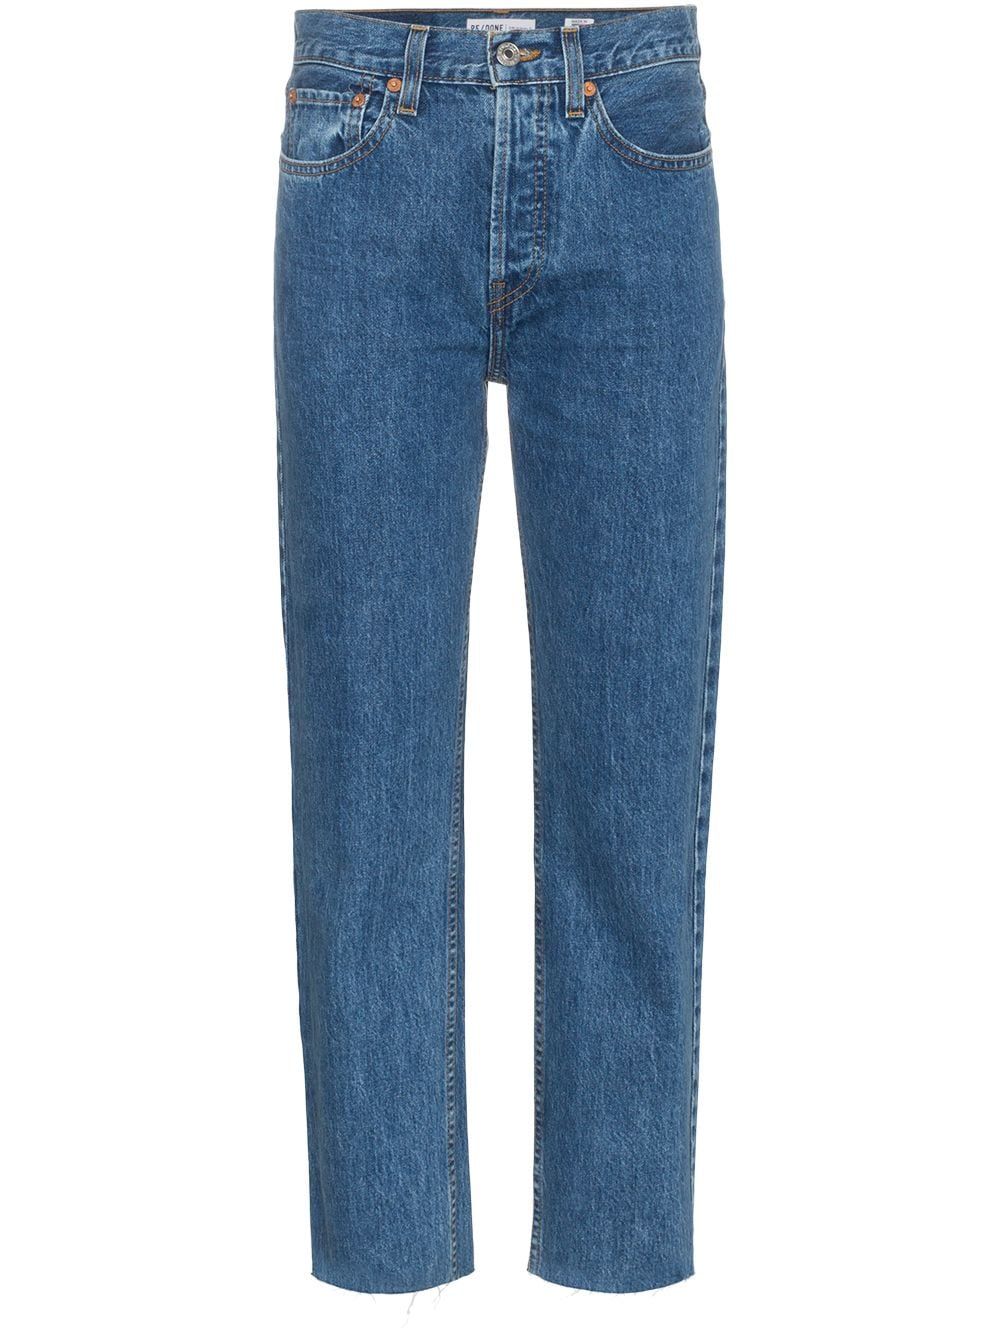 Stove Pipe 27 jeans | Farfetch (UK)